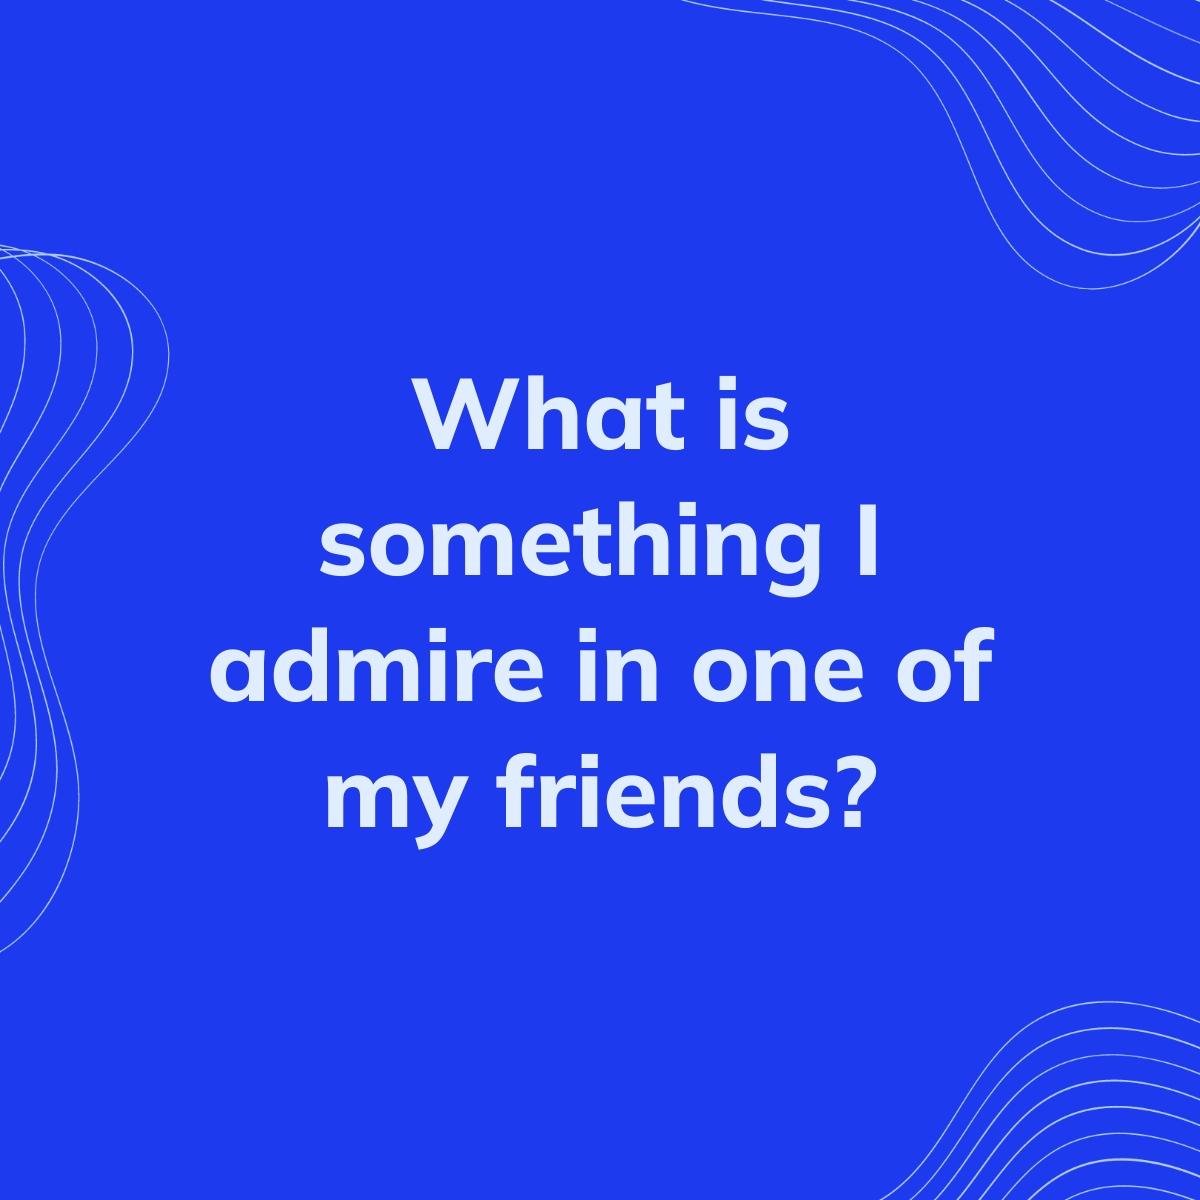 Journal Prompt: What is something I admire in one of my friends?